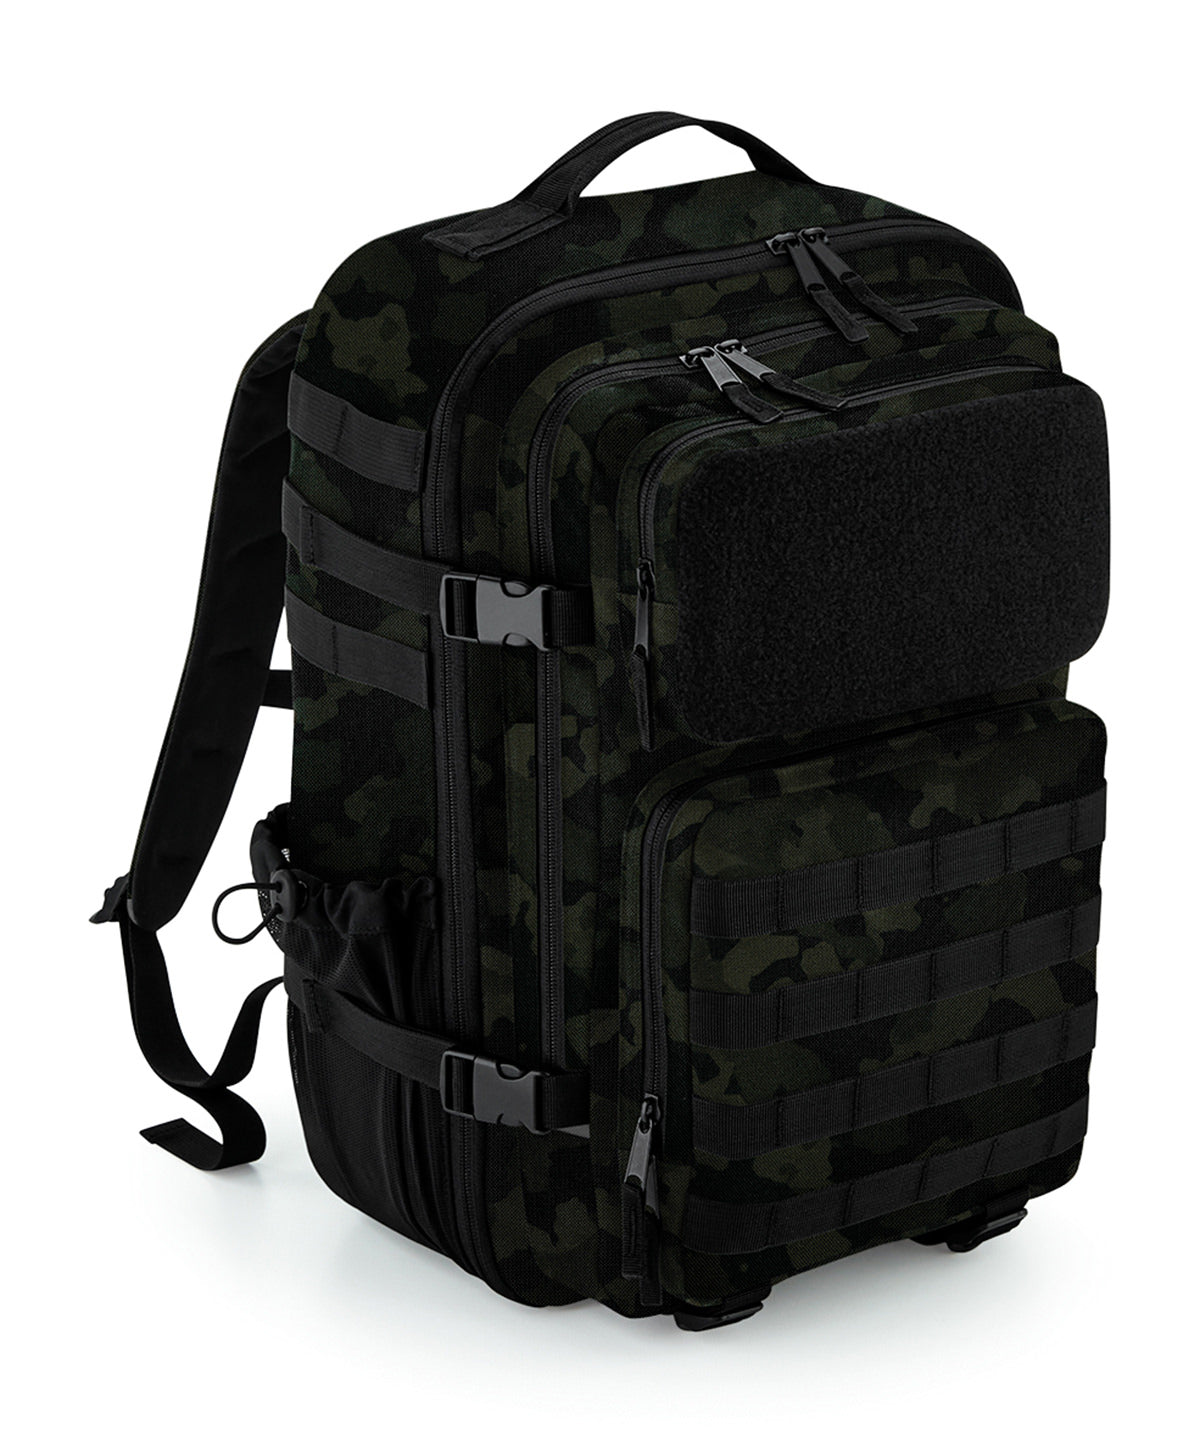 Personalised Bags - Camouflage Bagbase MOLLE tactical 35L backpack